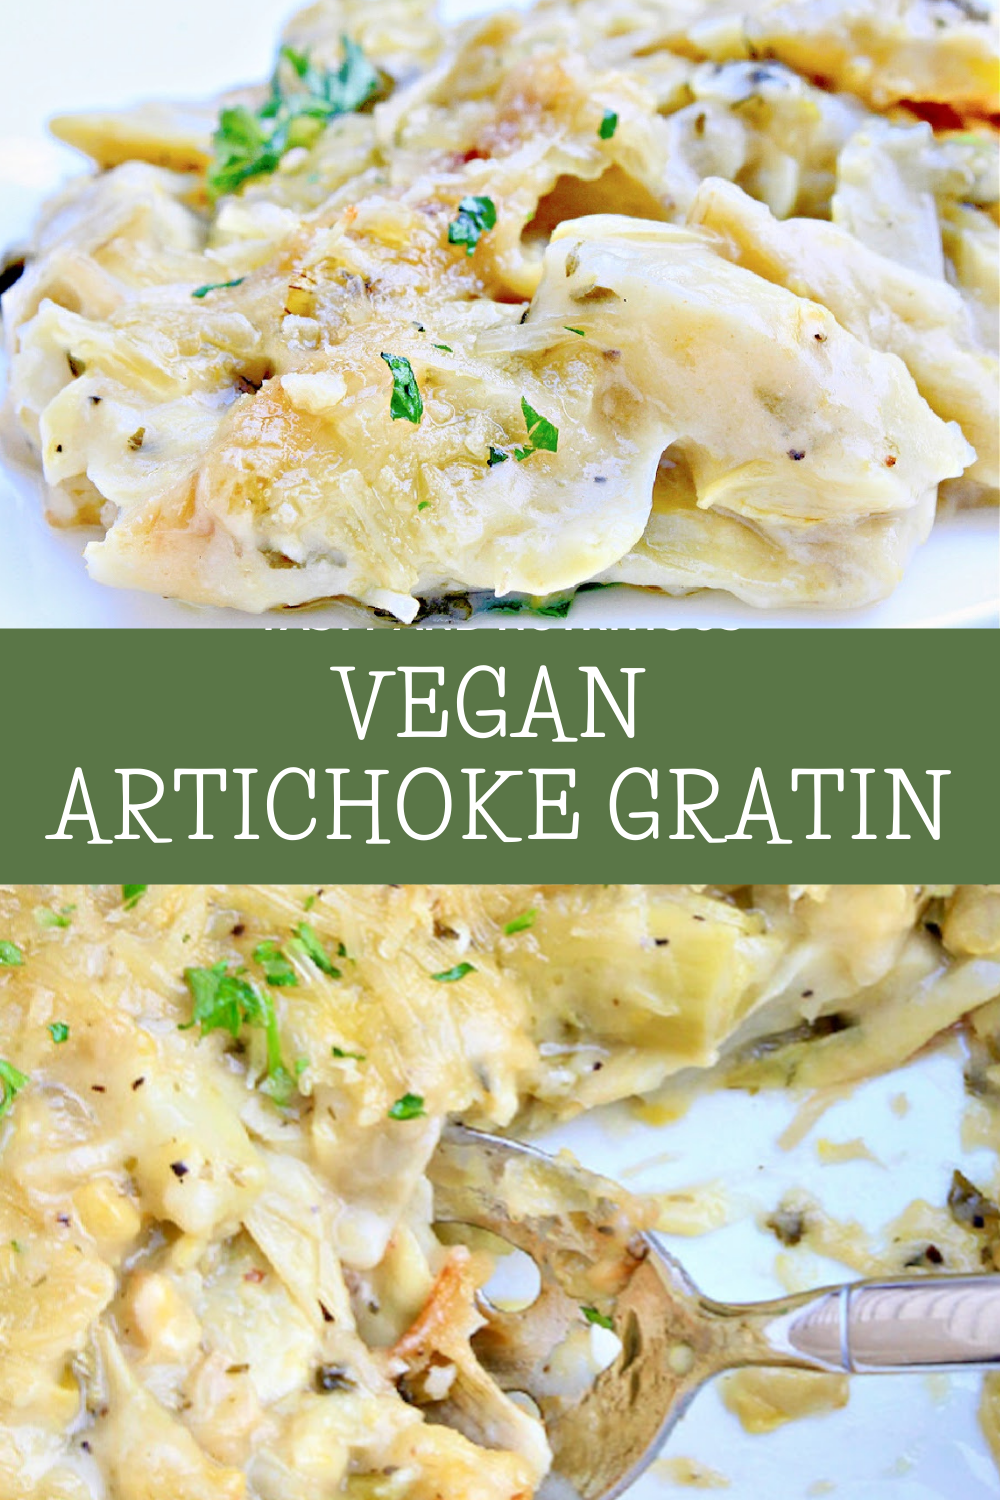 Artichoke Gratin ~ Artichokes smothered in a savory, creamy, dairy-free sauce then baked until bubbly. Simple and elegant for the holidays! via @thiswifecooks